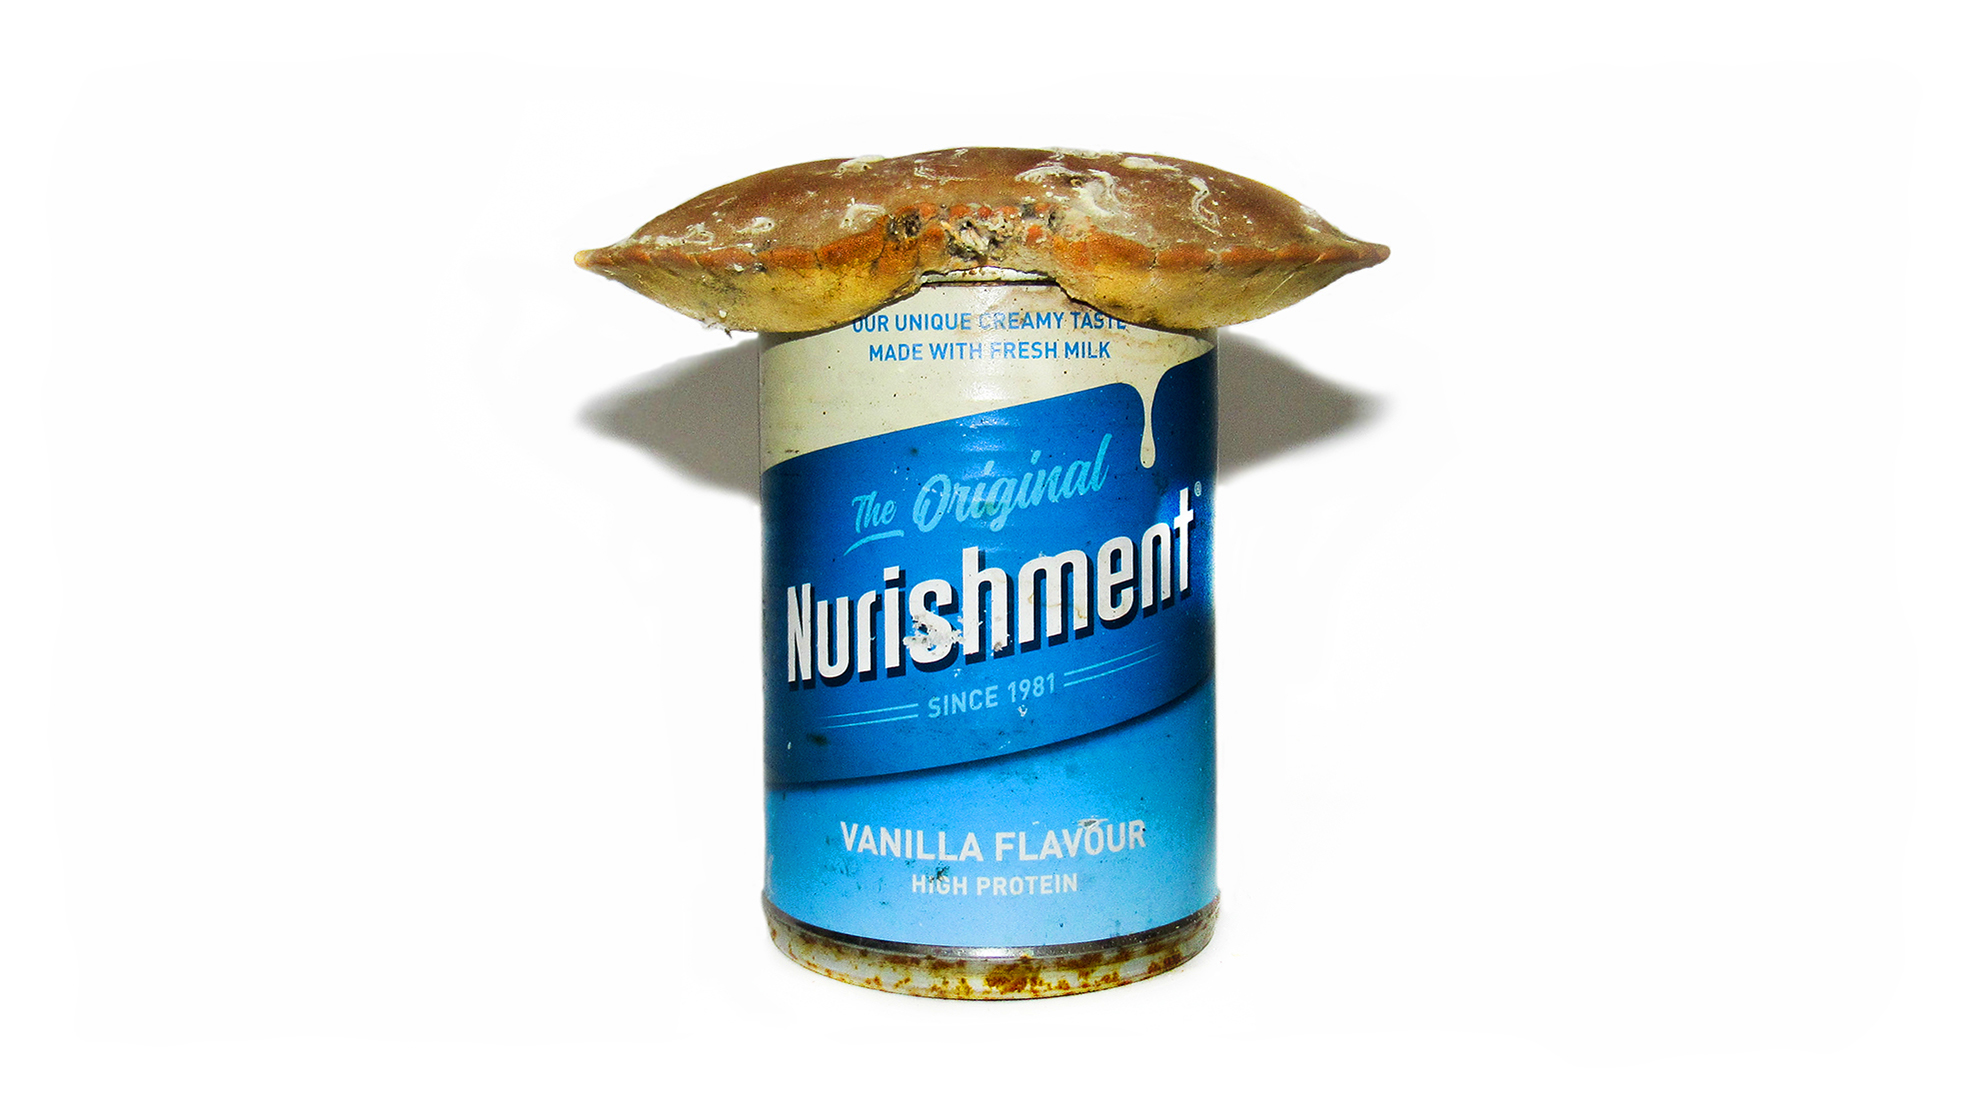 BA Fine Art Photograph by Abbey Nichols-Henderson showing a found object sculpture created by putting a crab shell on top of a can of vanilla nurishment.